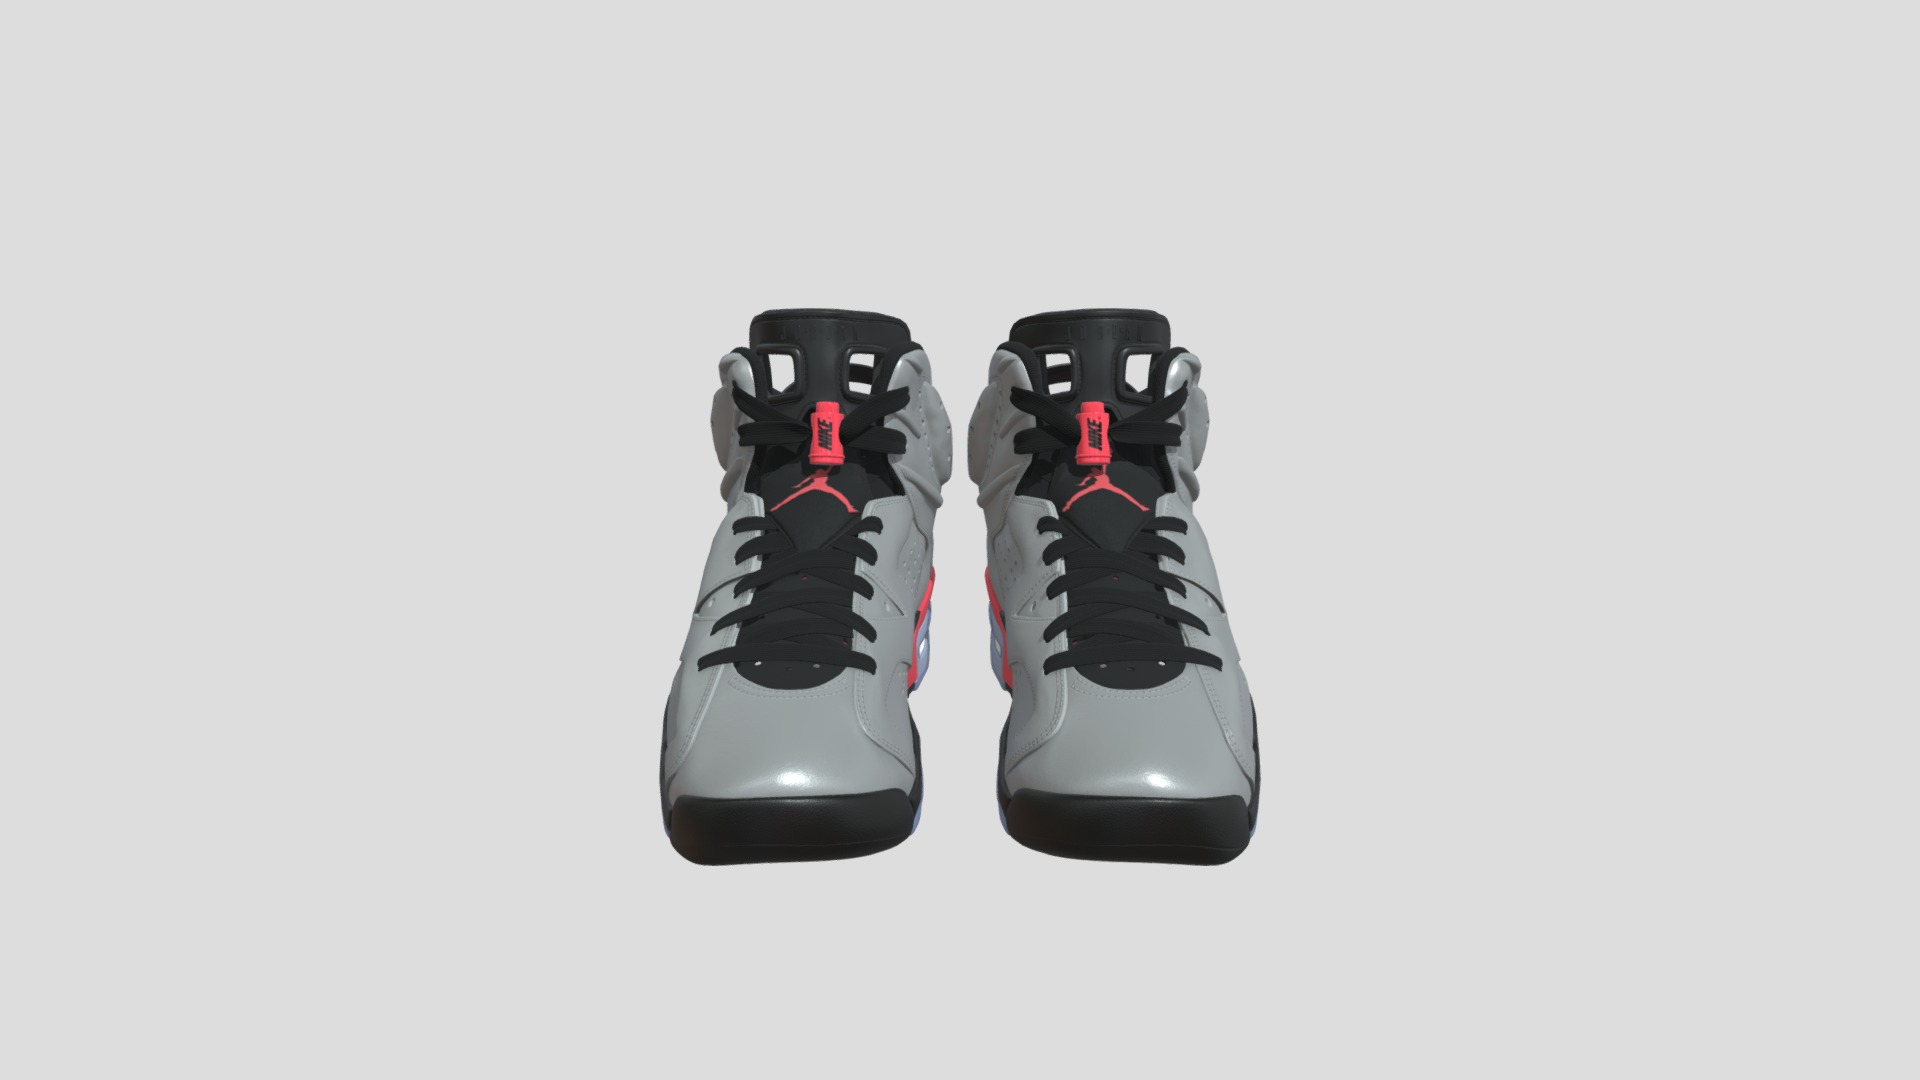 3D model Jordan 6 Retro Reflections of a Champion - This is a 3D model of the Jordan 6 Retro Reflections of a Champion. The 3D model is about a pair of black and red shoes.